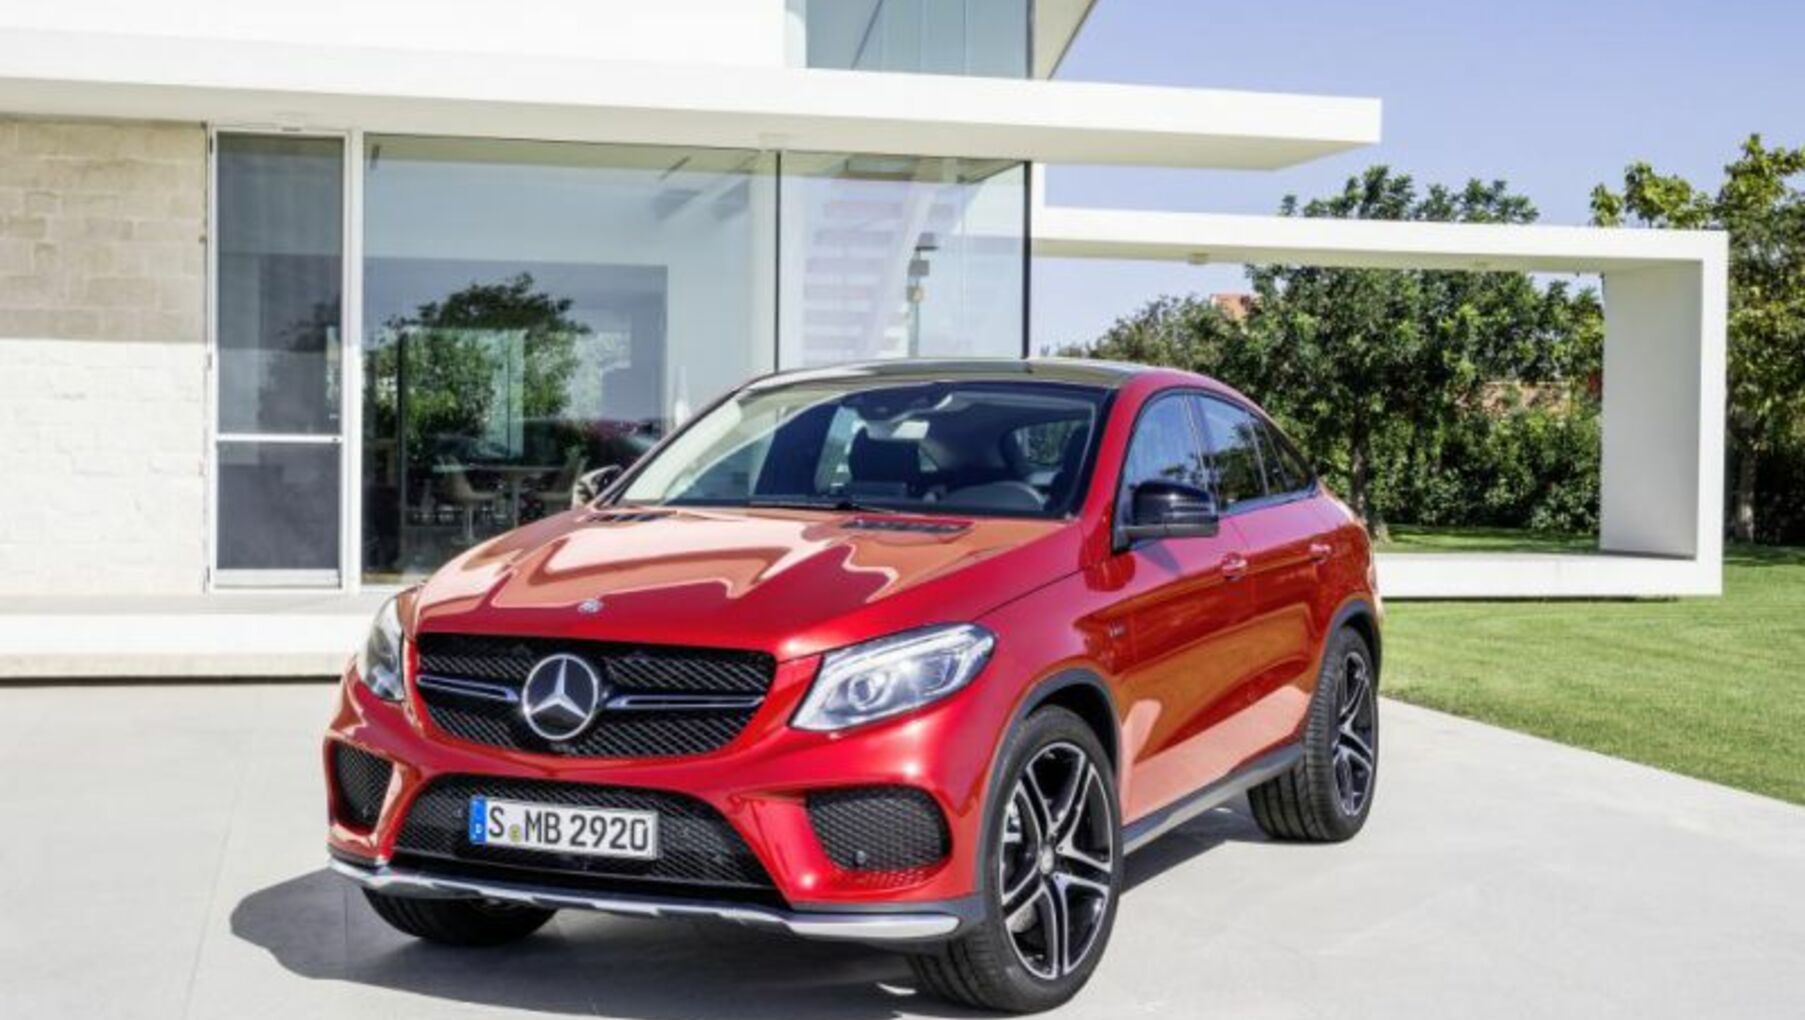 Mercedes-Benz GLE Coupe (C292) GLE 350d (258 Hp) 4MATIC G-TRONIC 2015, 2016, 2017, 2018, 2019, 2020, 2021 